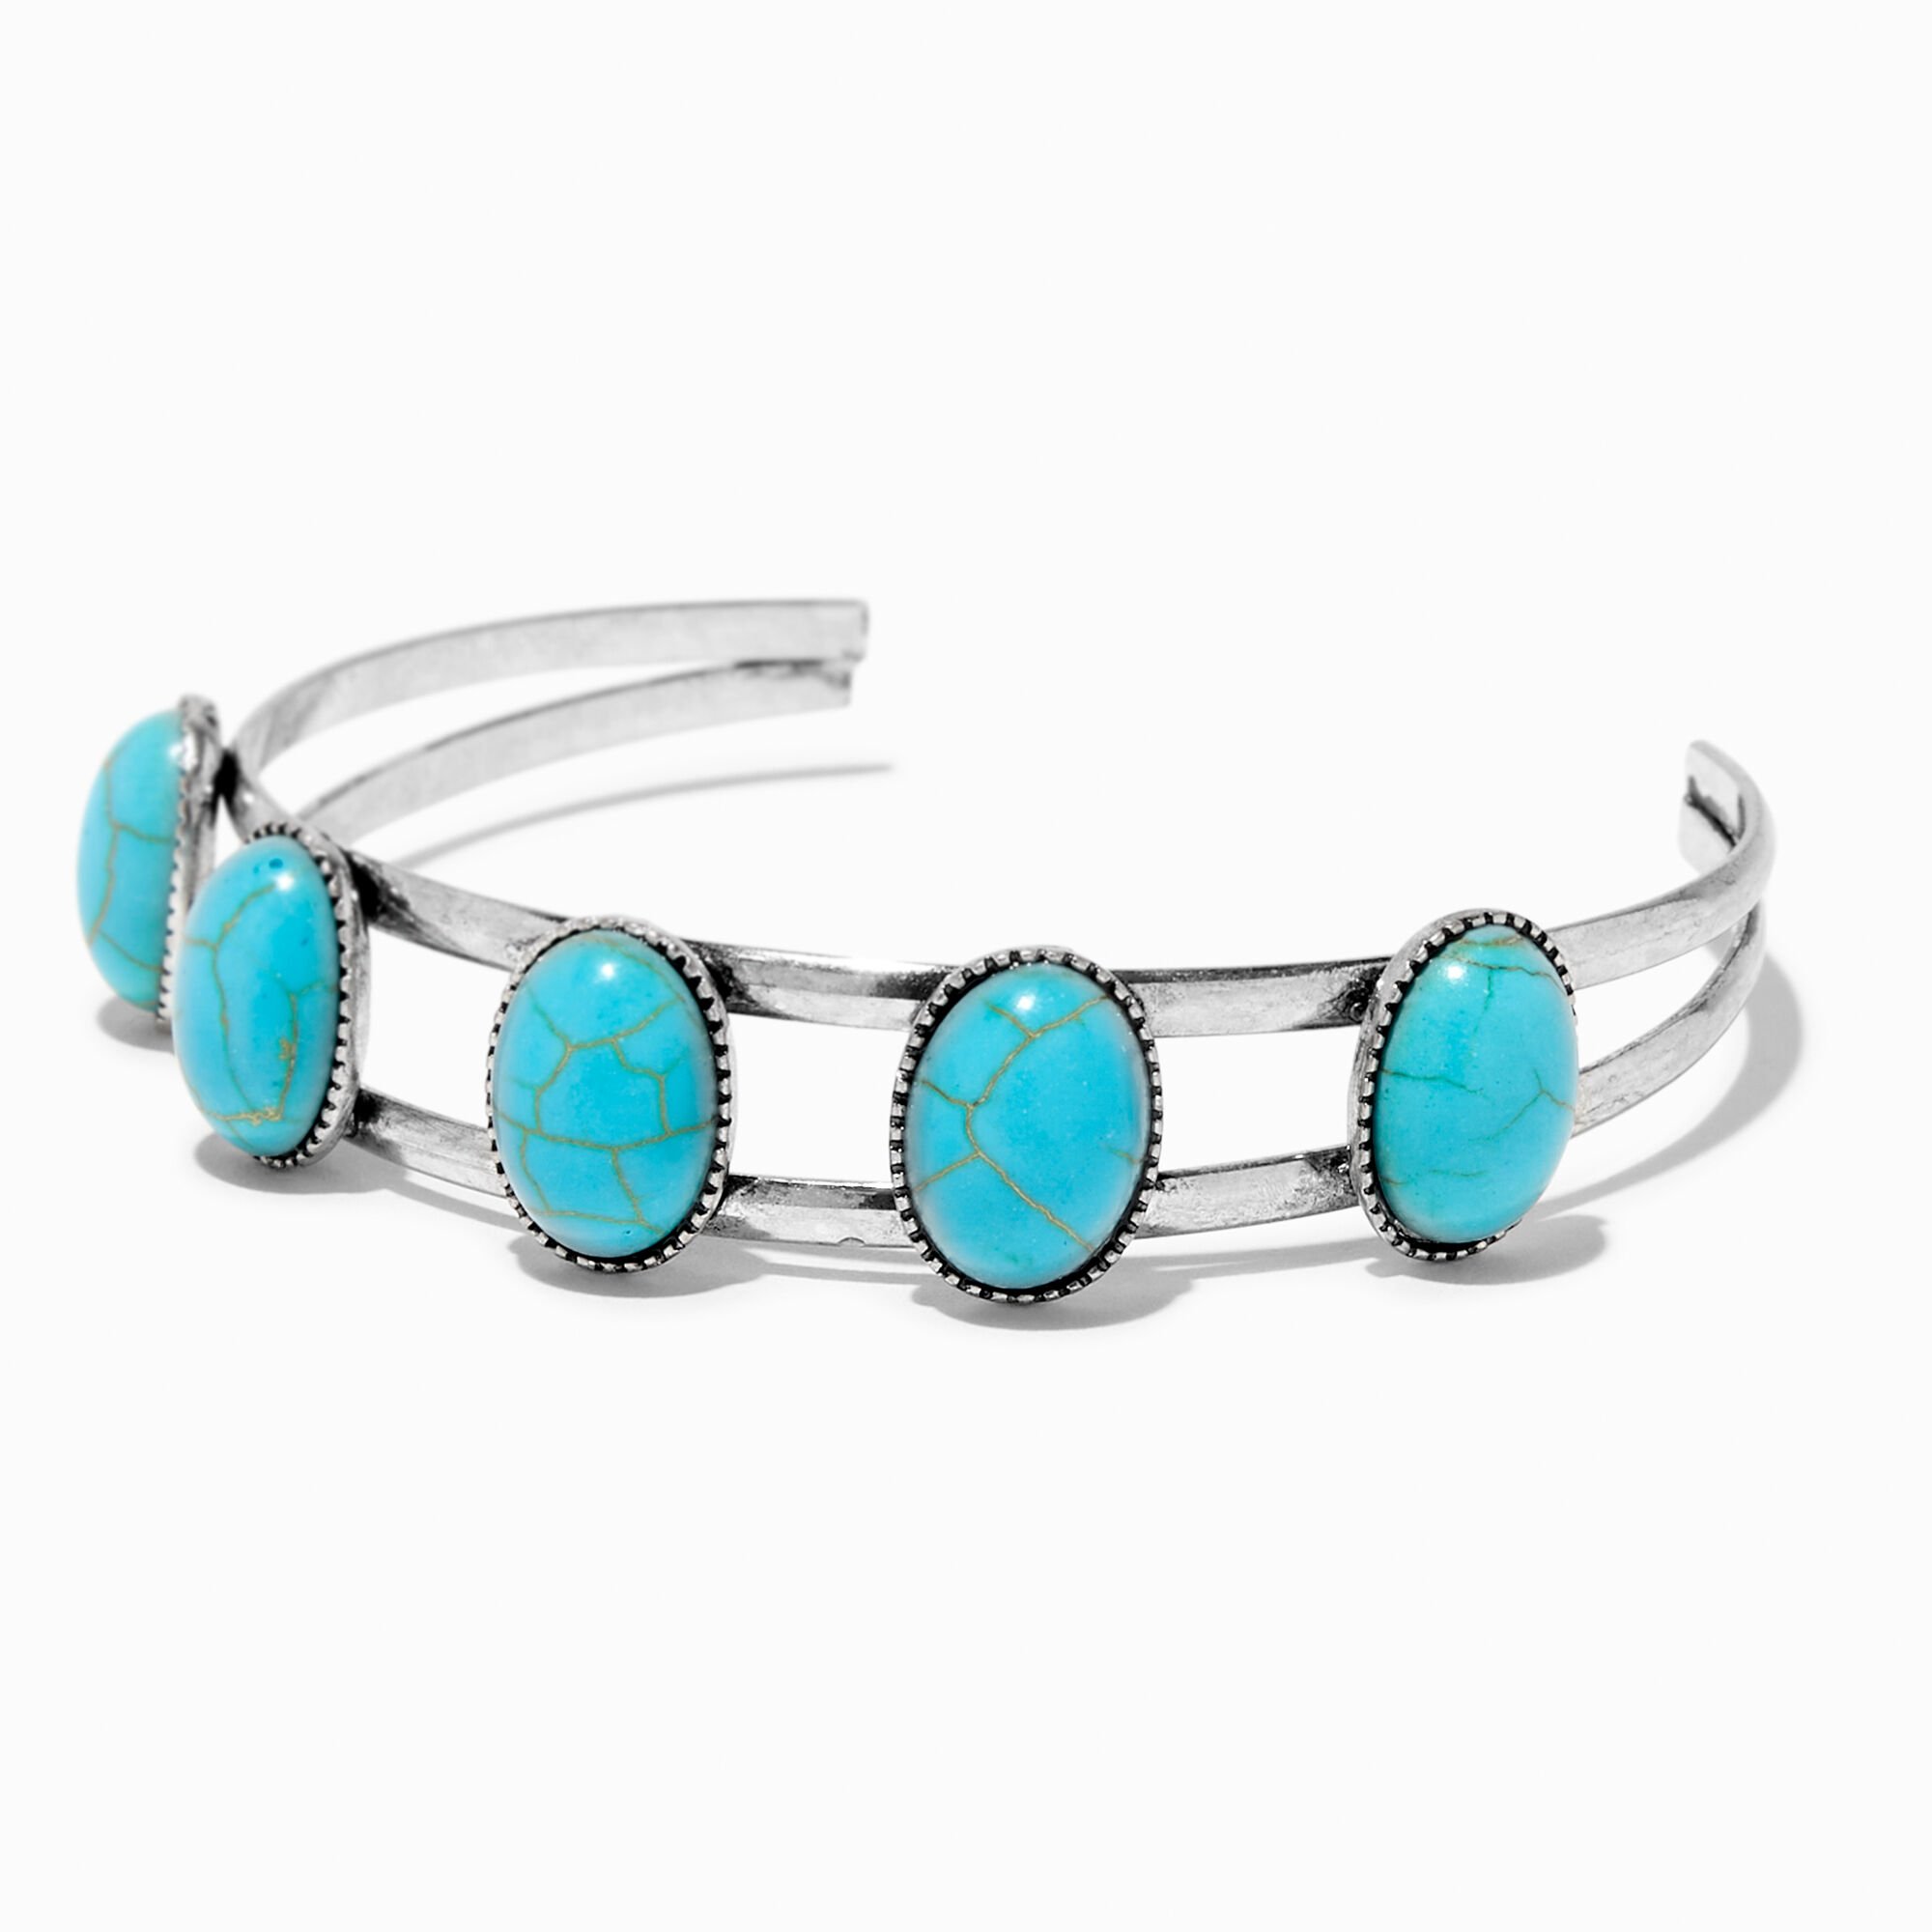 View Claires SilverTone Stones Cuff Bracelet Turquoise information